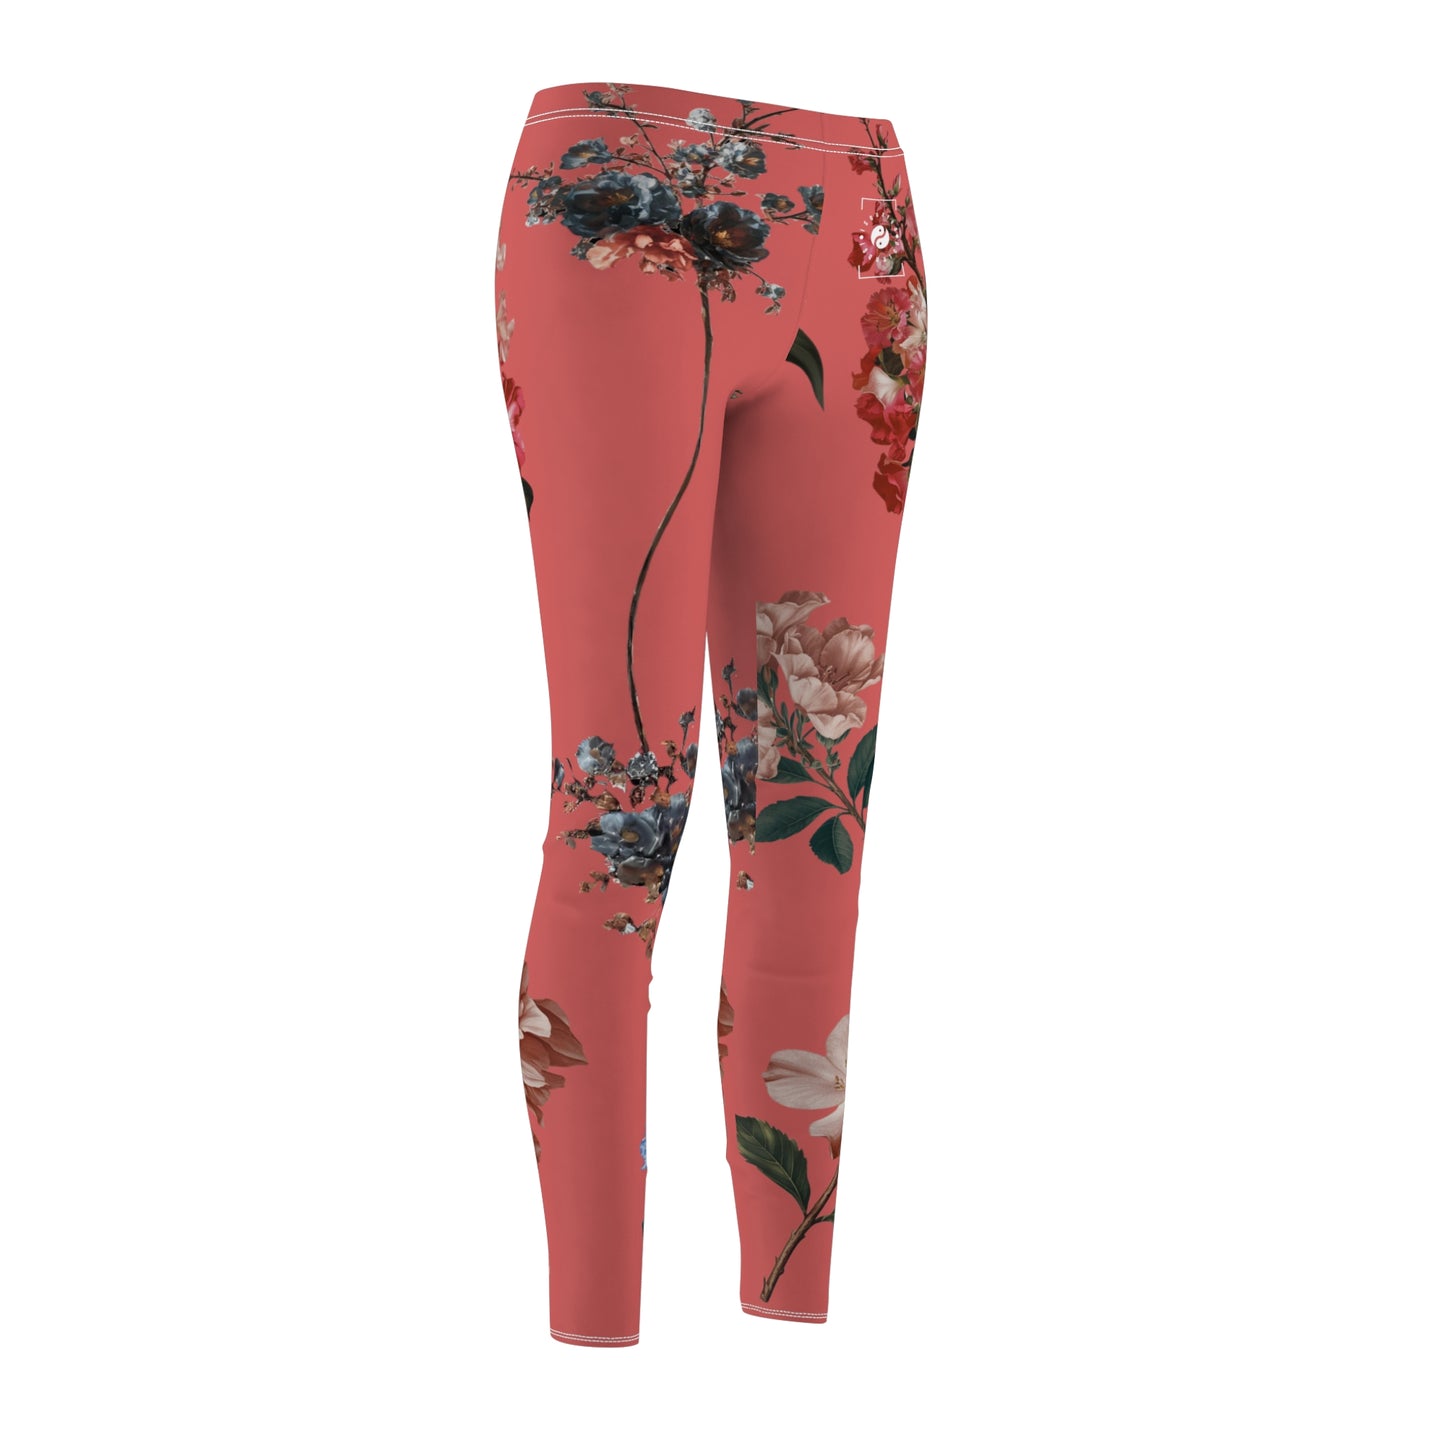 Botanicals on Coral - Casual Leggings